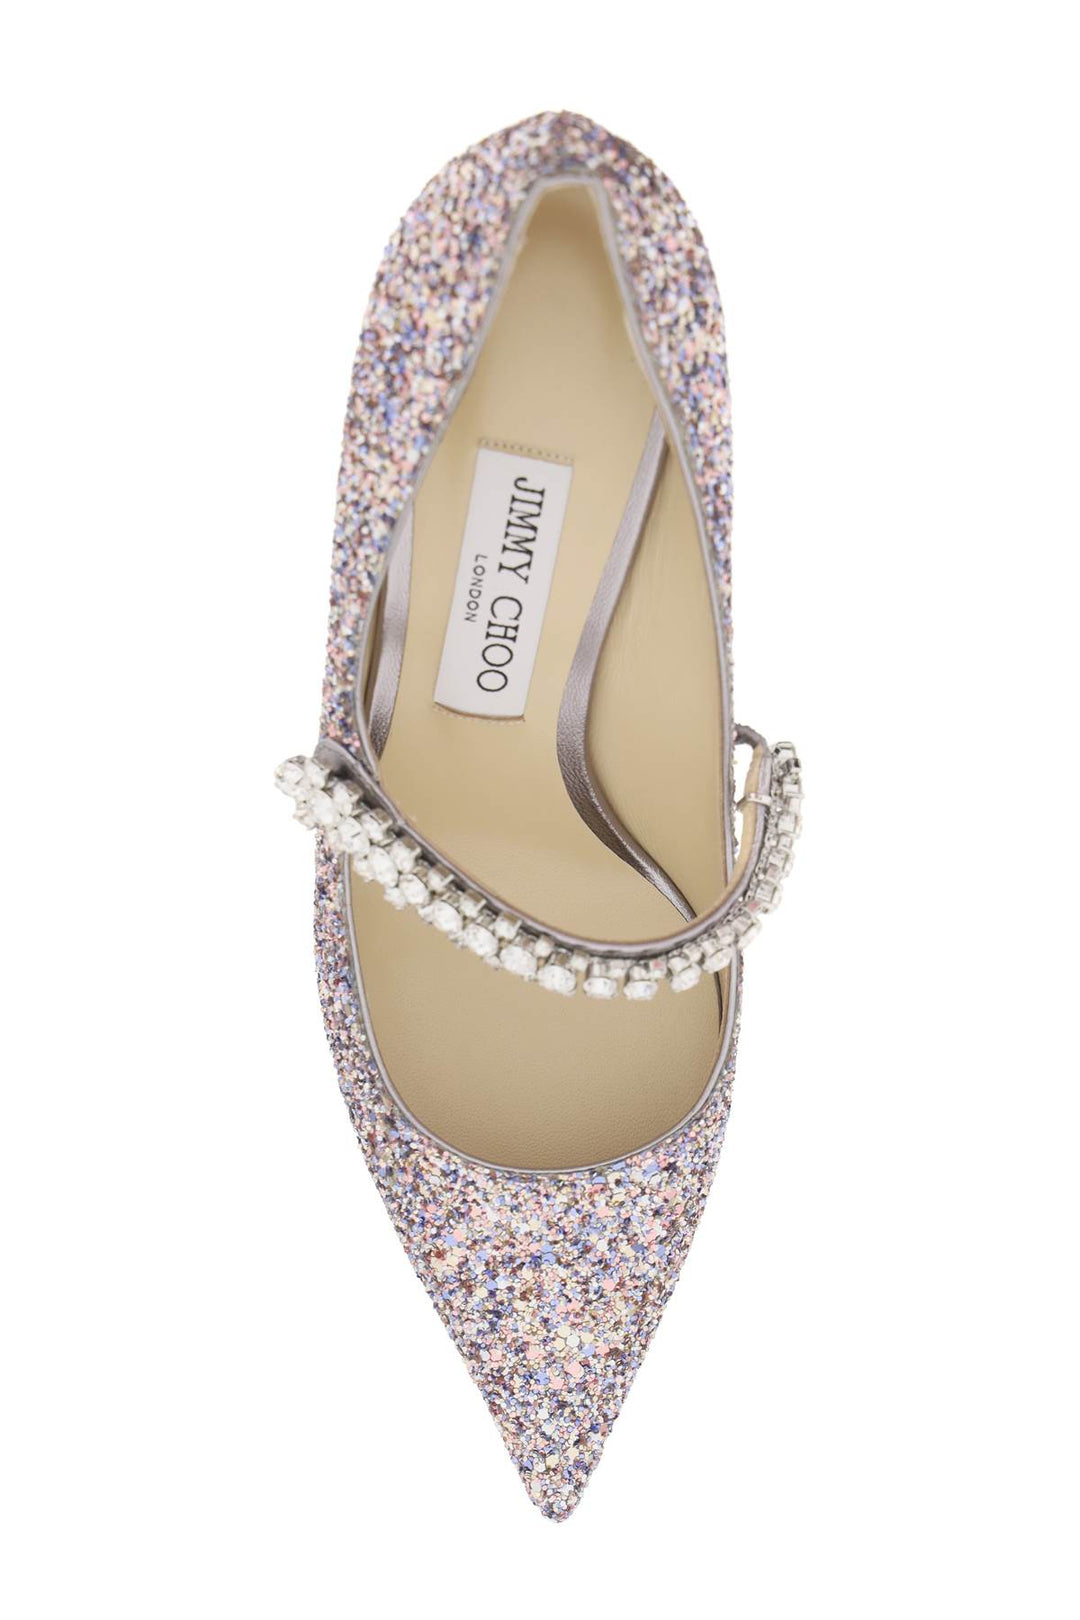 Jimmy Choo Bing 65 Pumps With Glitter And Crystals   Pink